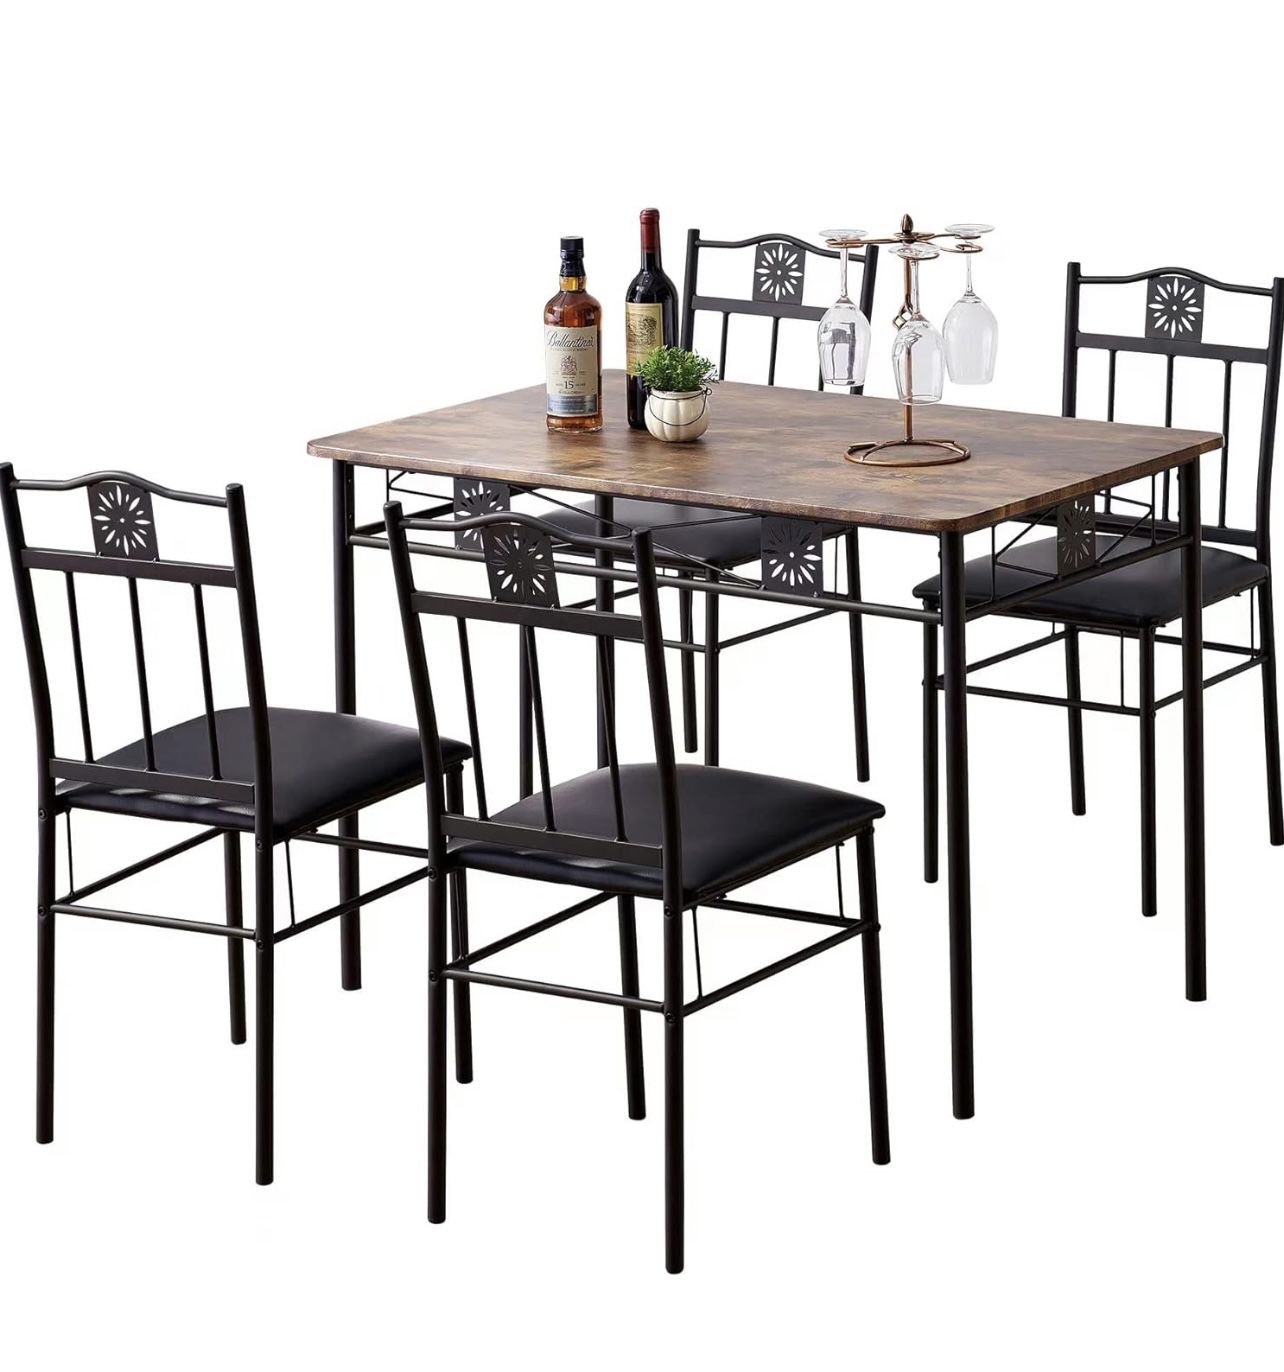 VECELO Dining Table Set with 4 Chairs, Retro Brown